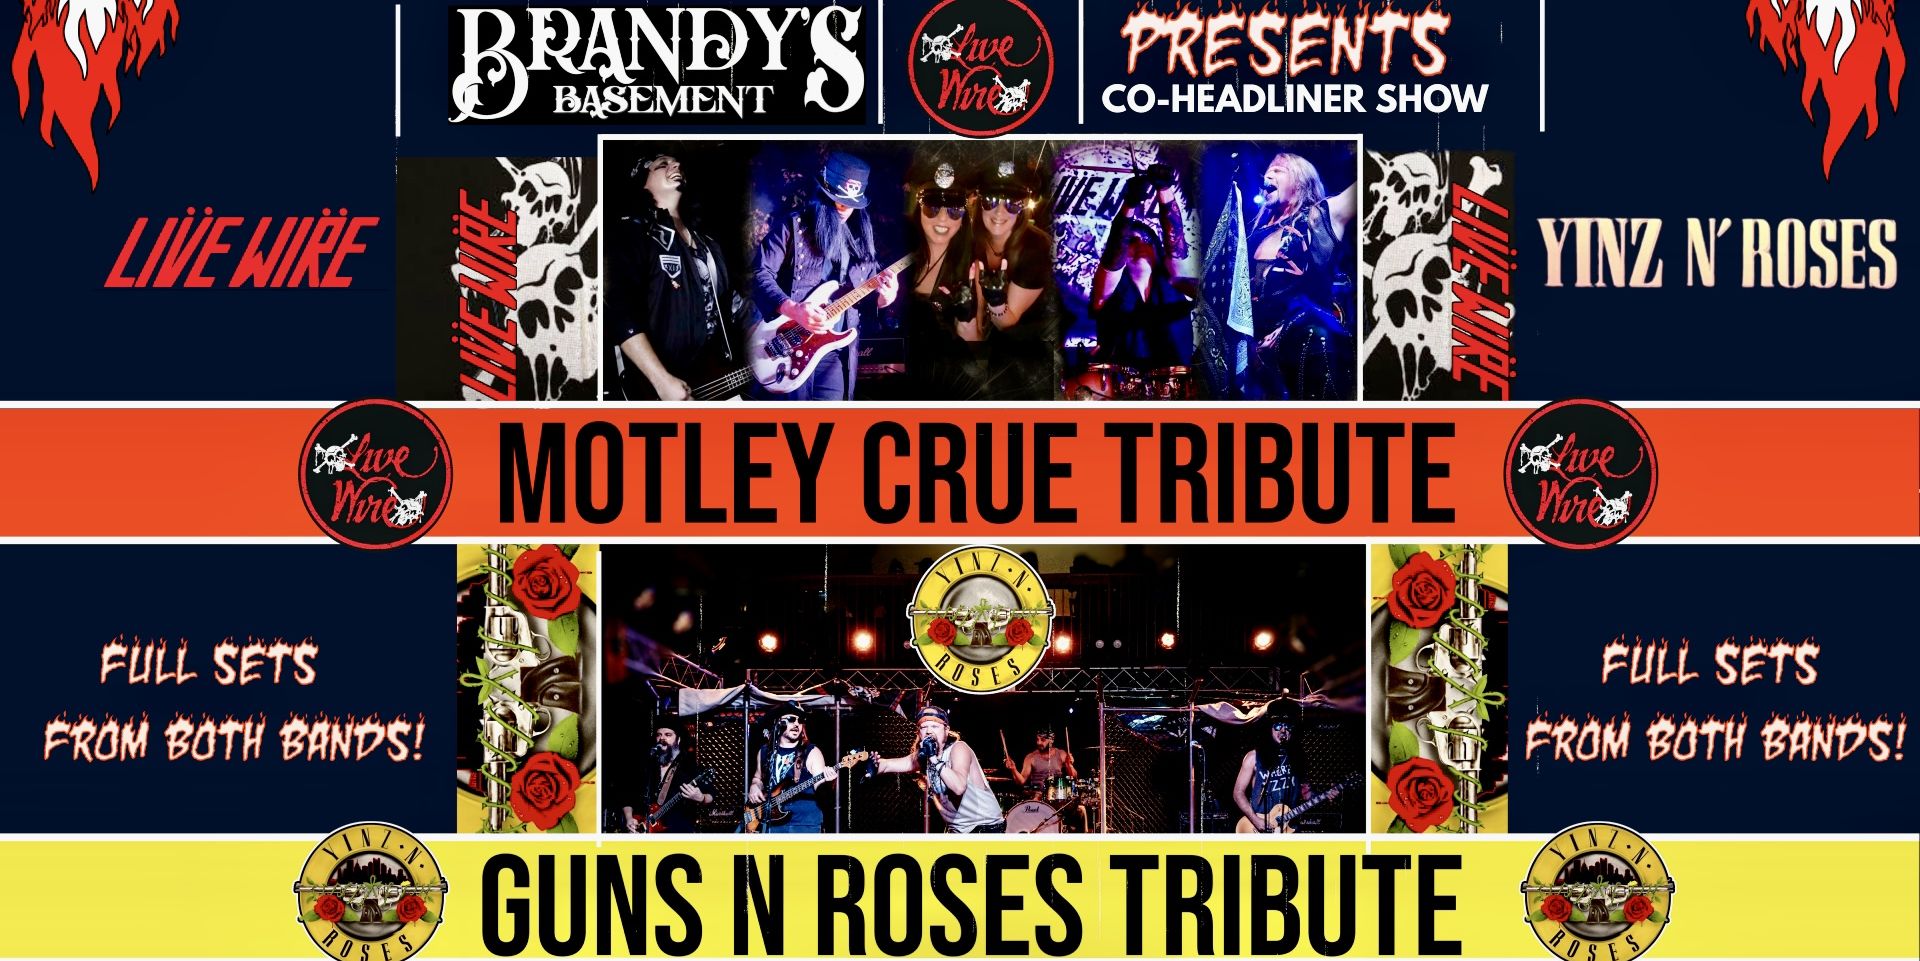 Live Wire- Motley Crue Tribute with Yinz N Roses- Guns N Roses Tribute promotional image